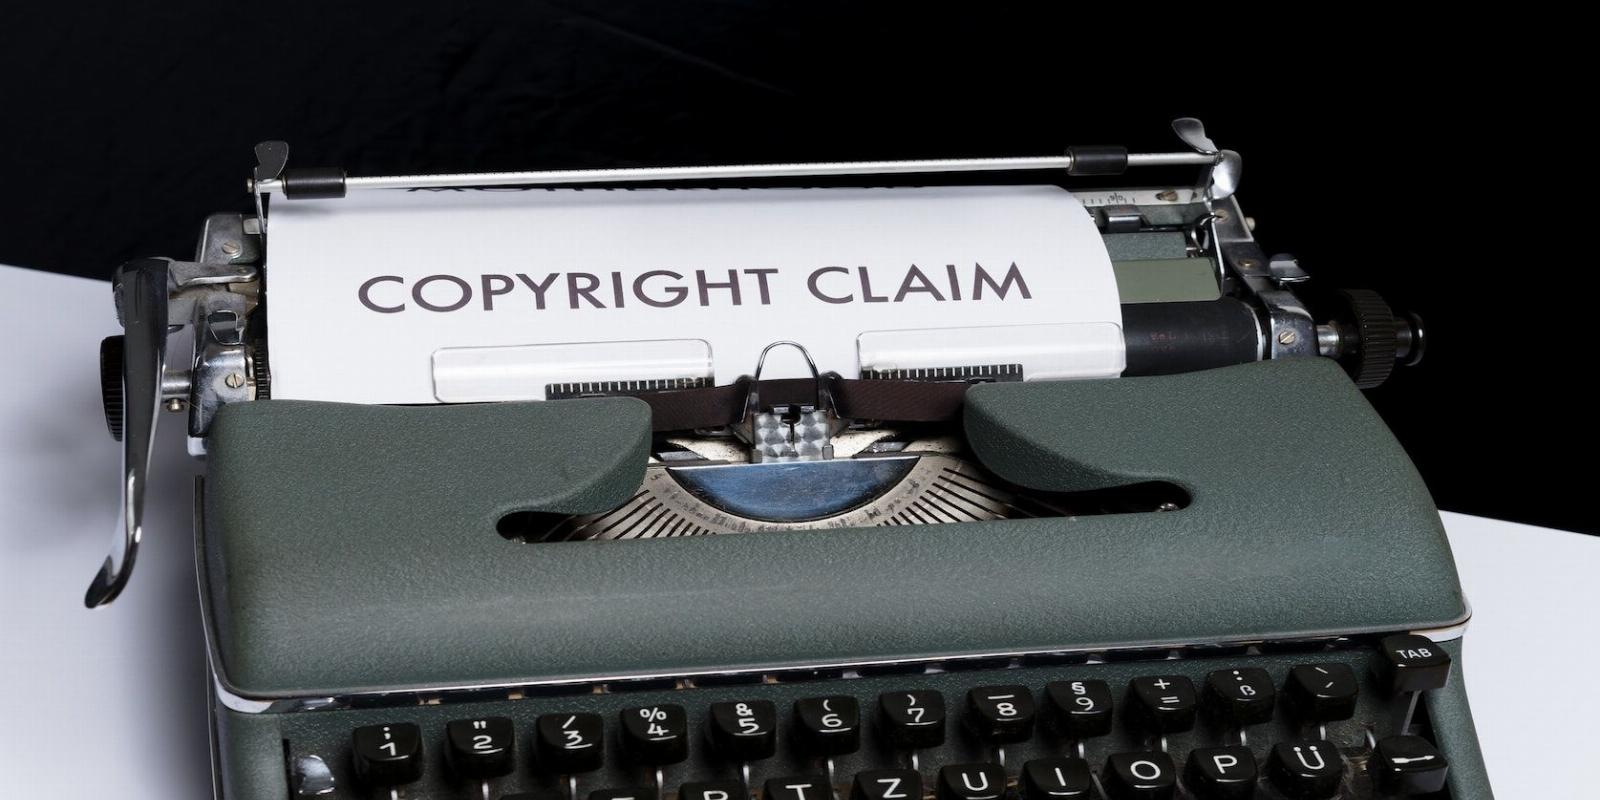 How to Check If a Video Is Copyrighted